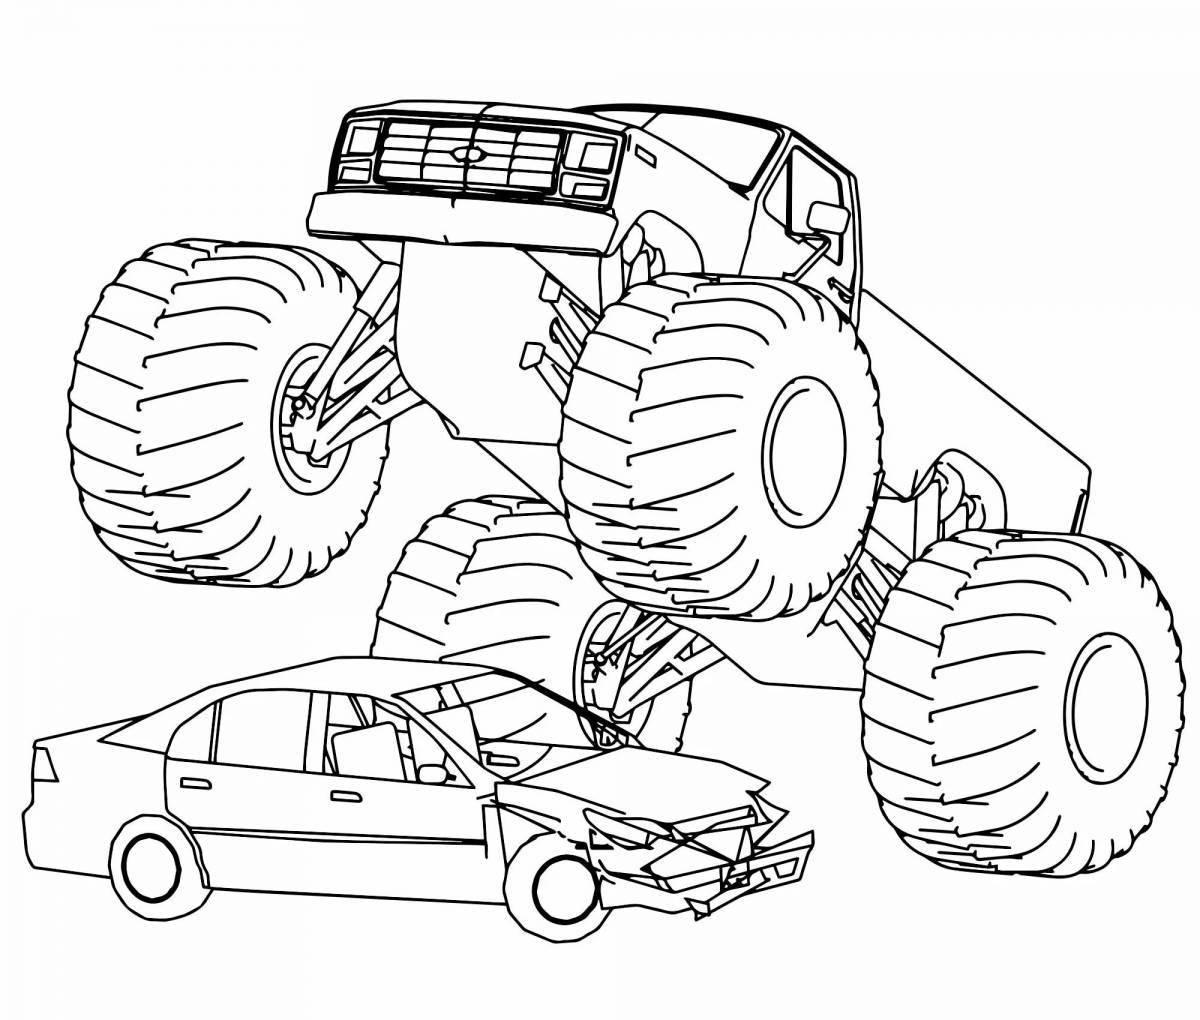 Colorfully embroidered monster truck coloring book